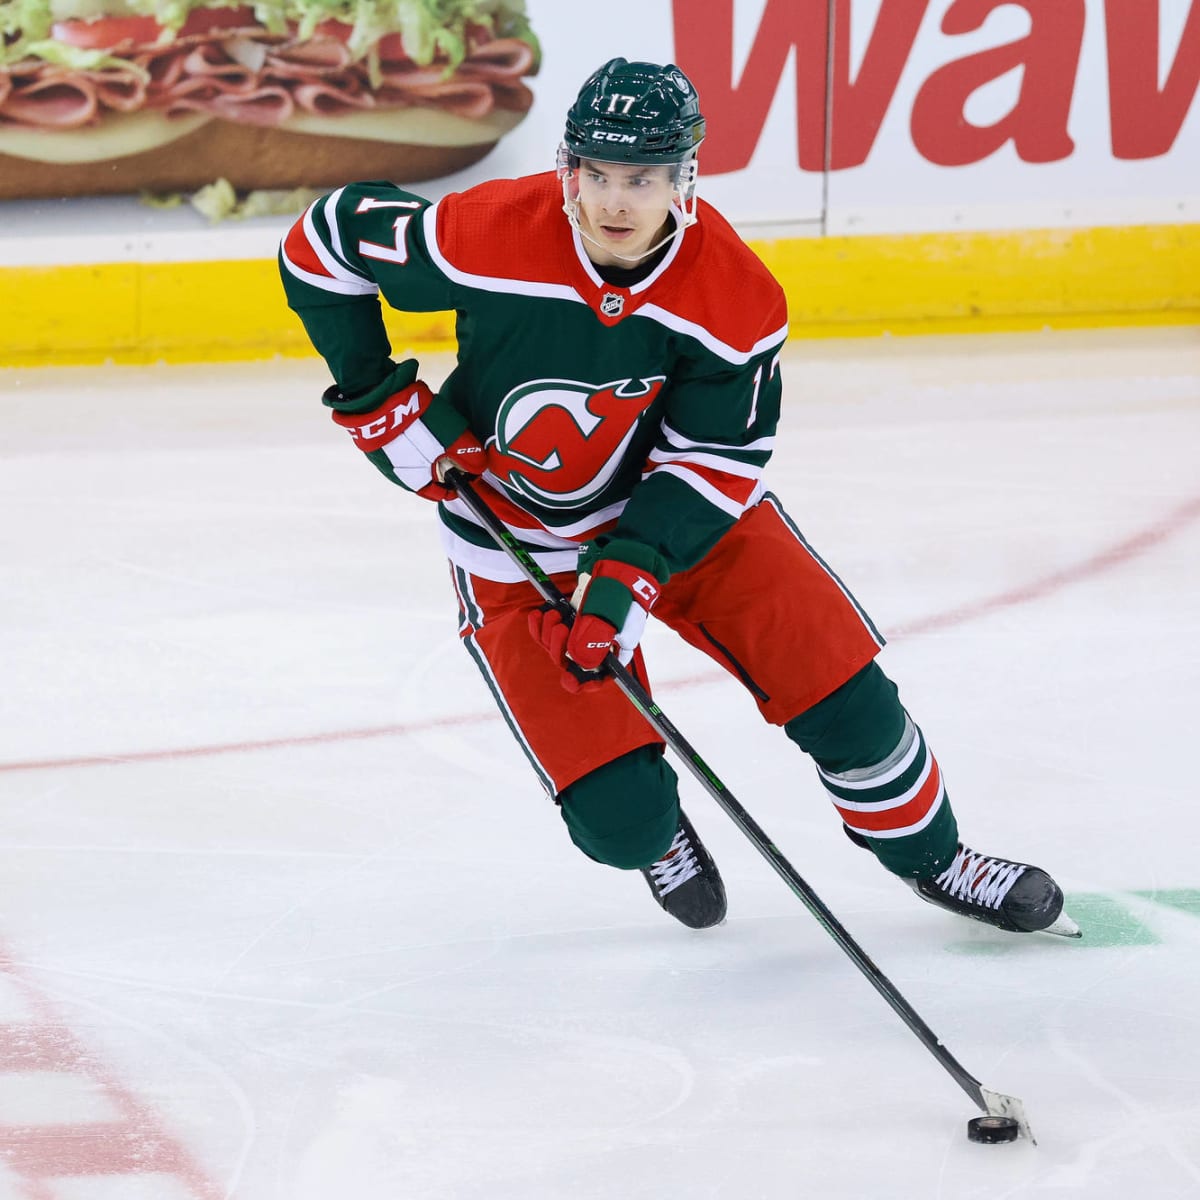 New Jersey Devils Re-Sign Yegor Sharangovich for 2 Seasons at $4 Million -  All About The Jersey